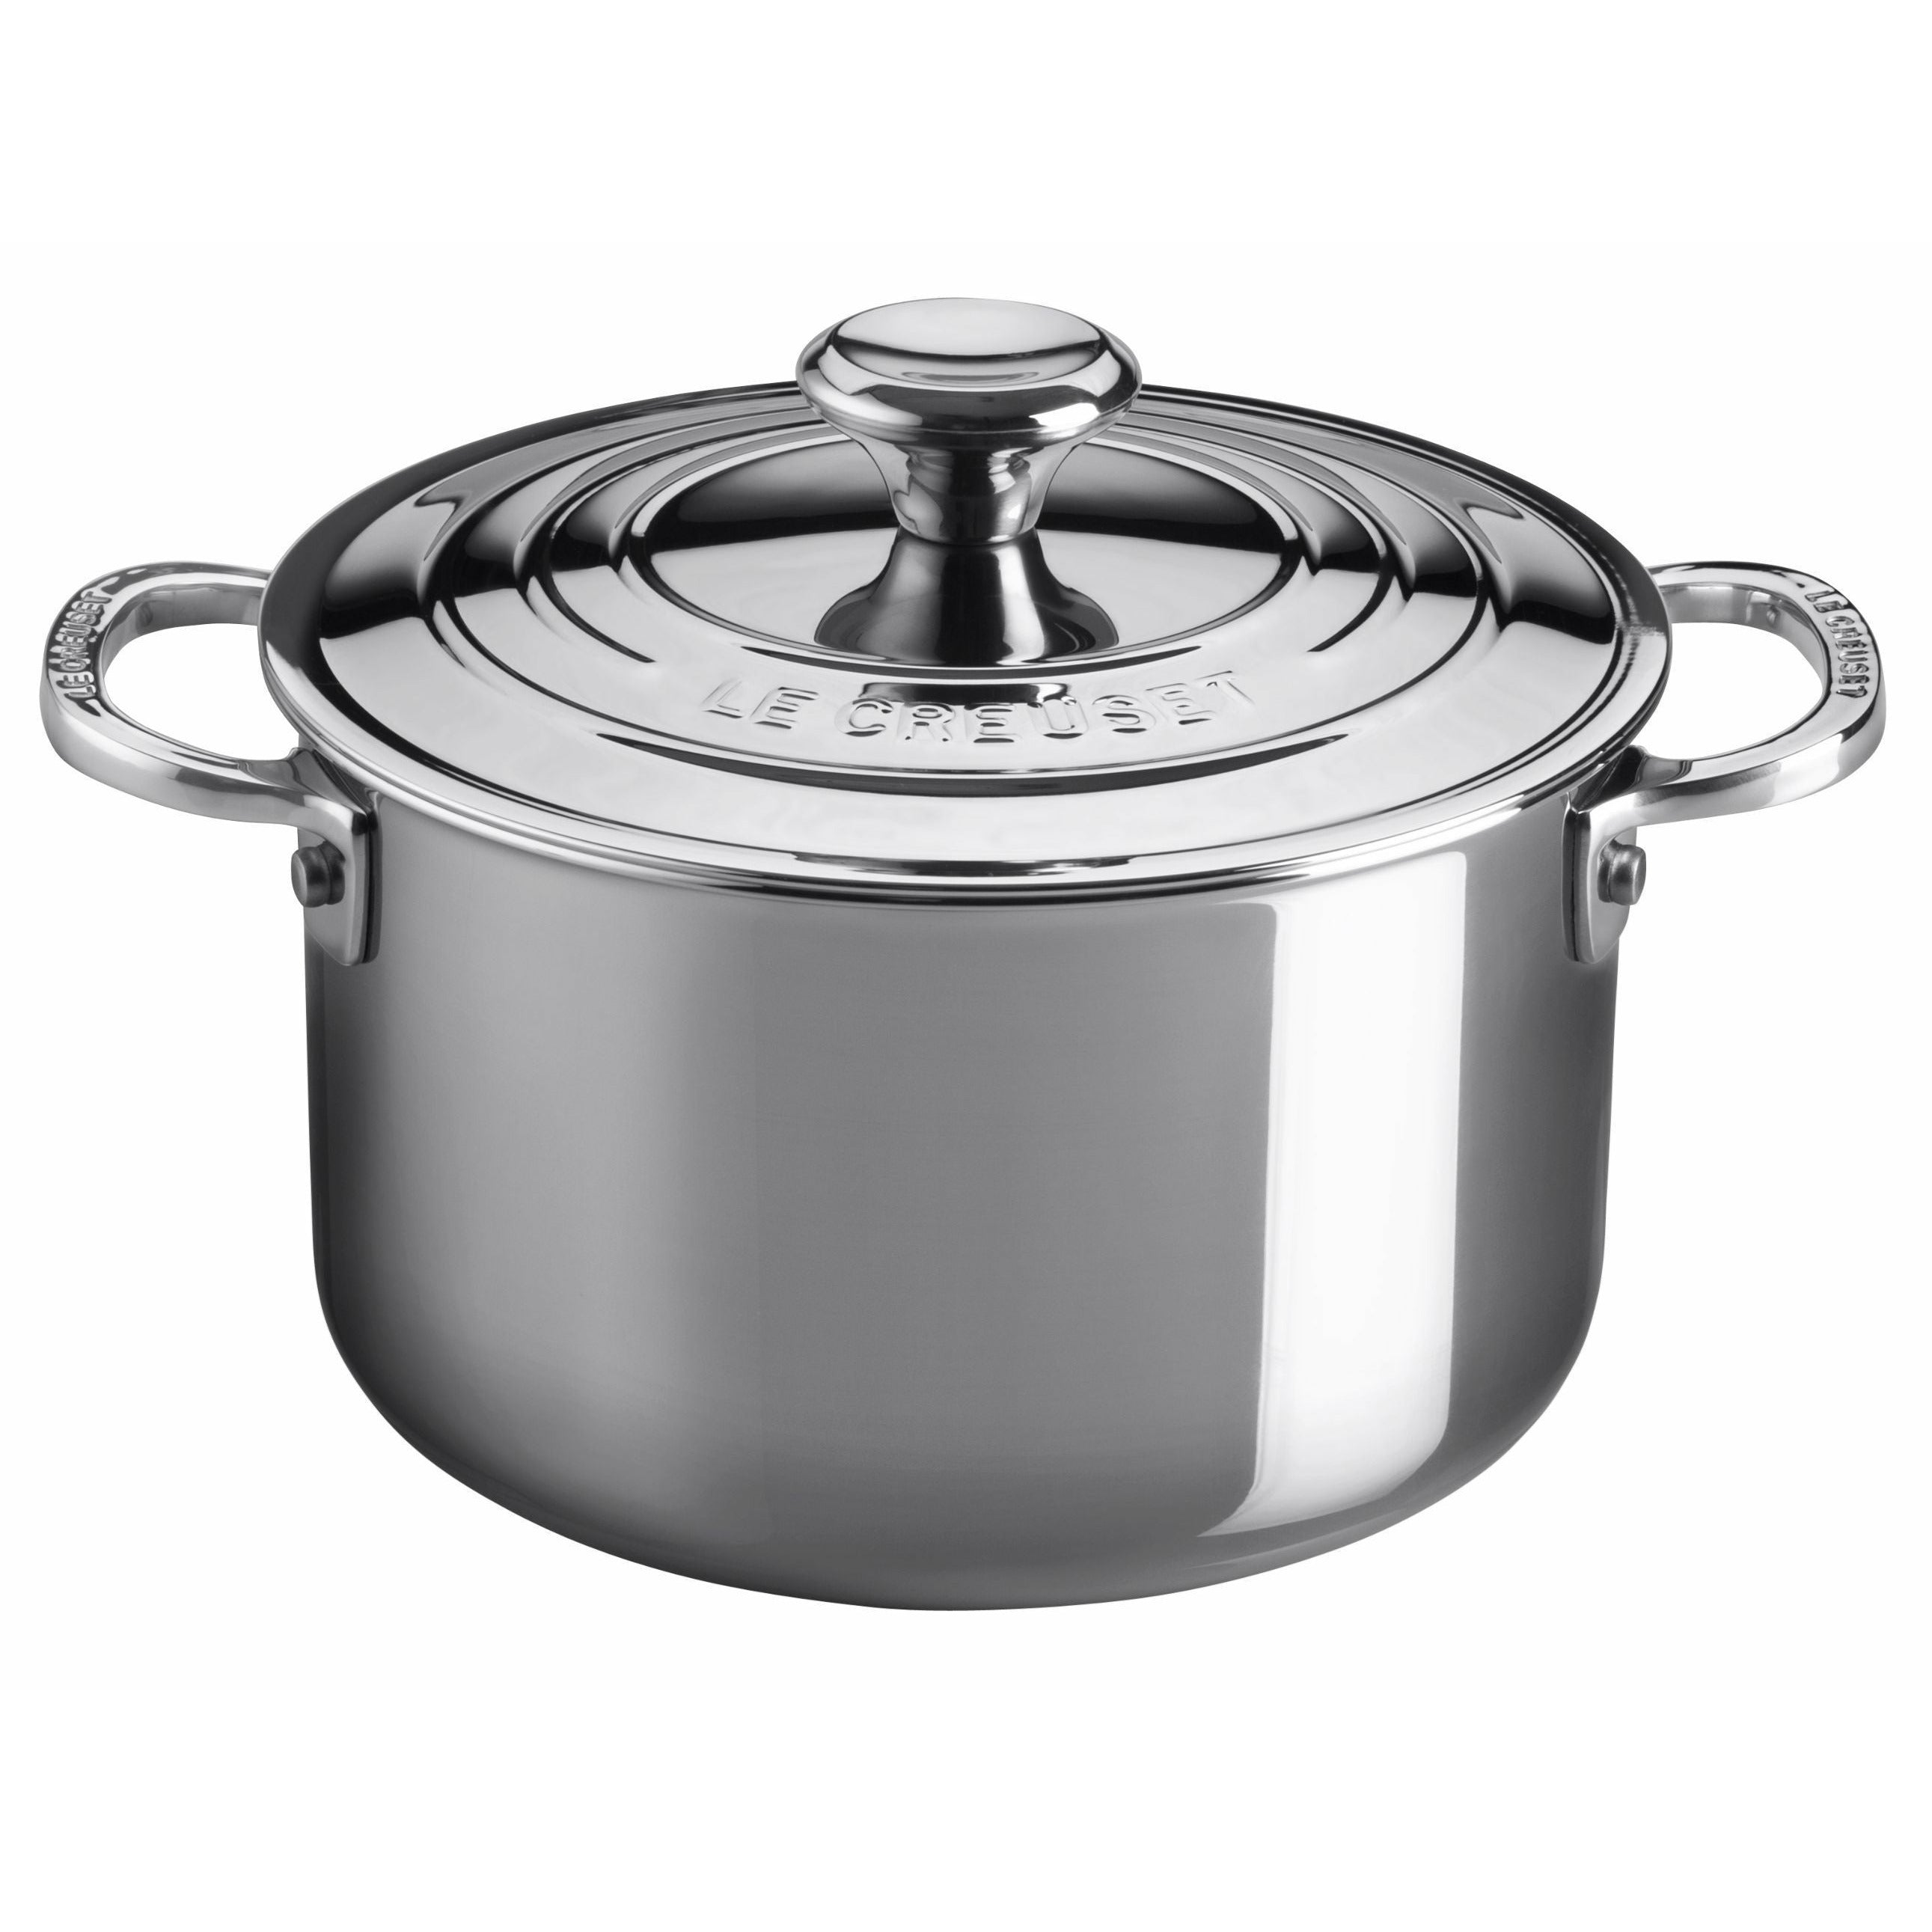 Le Creuset Signature Stainless Steel Deep Casserole With Lid, 3.8 L